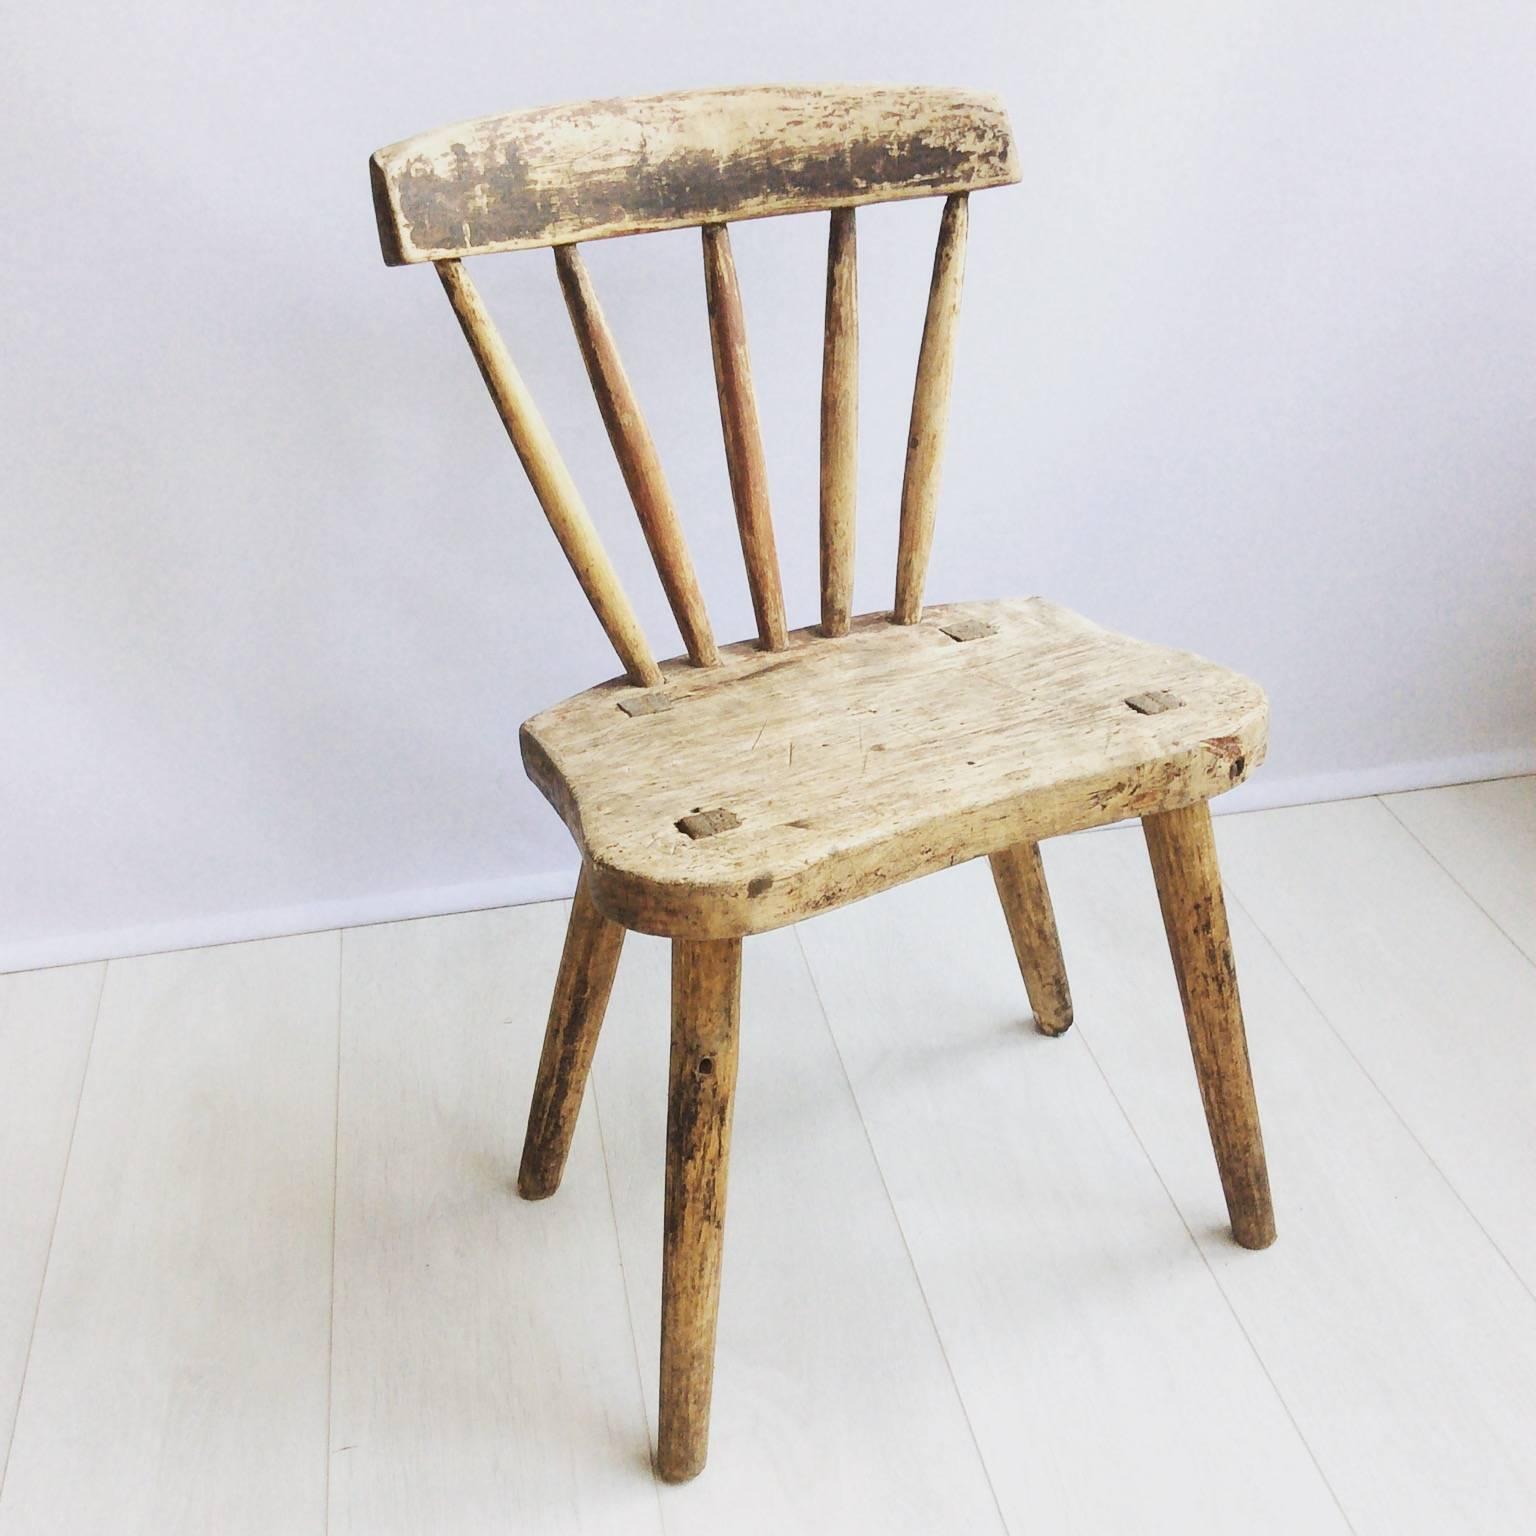 Primitive wooden chair from Dalarna, Sweden, circa 1800.

Great shape with traces of paint, lovely aged patina.
    